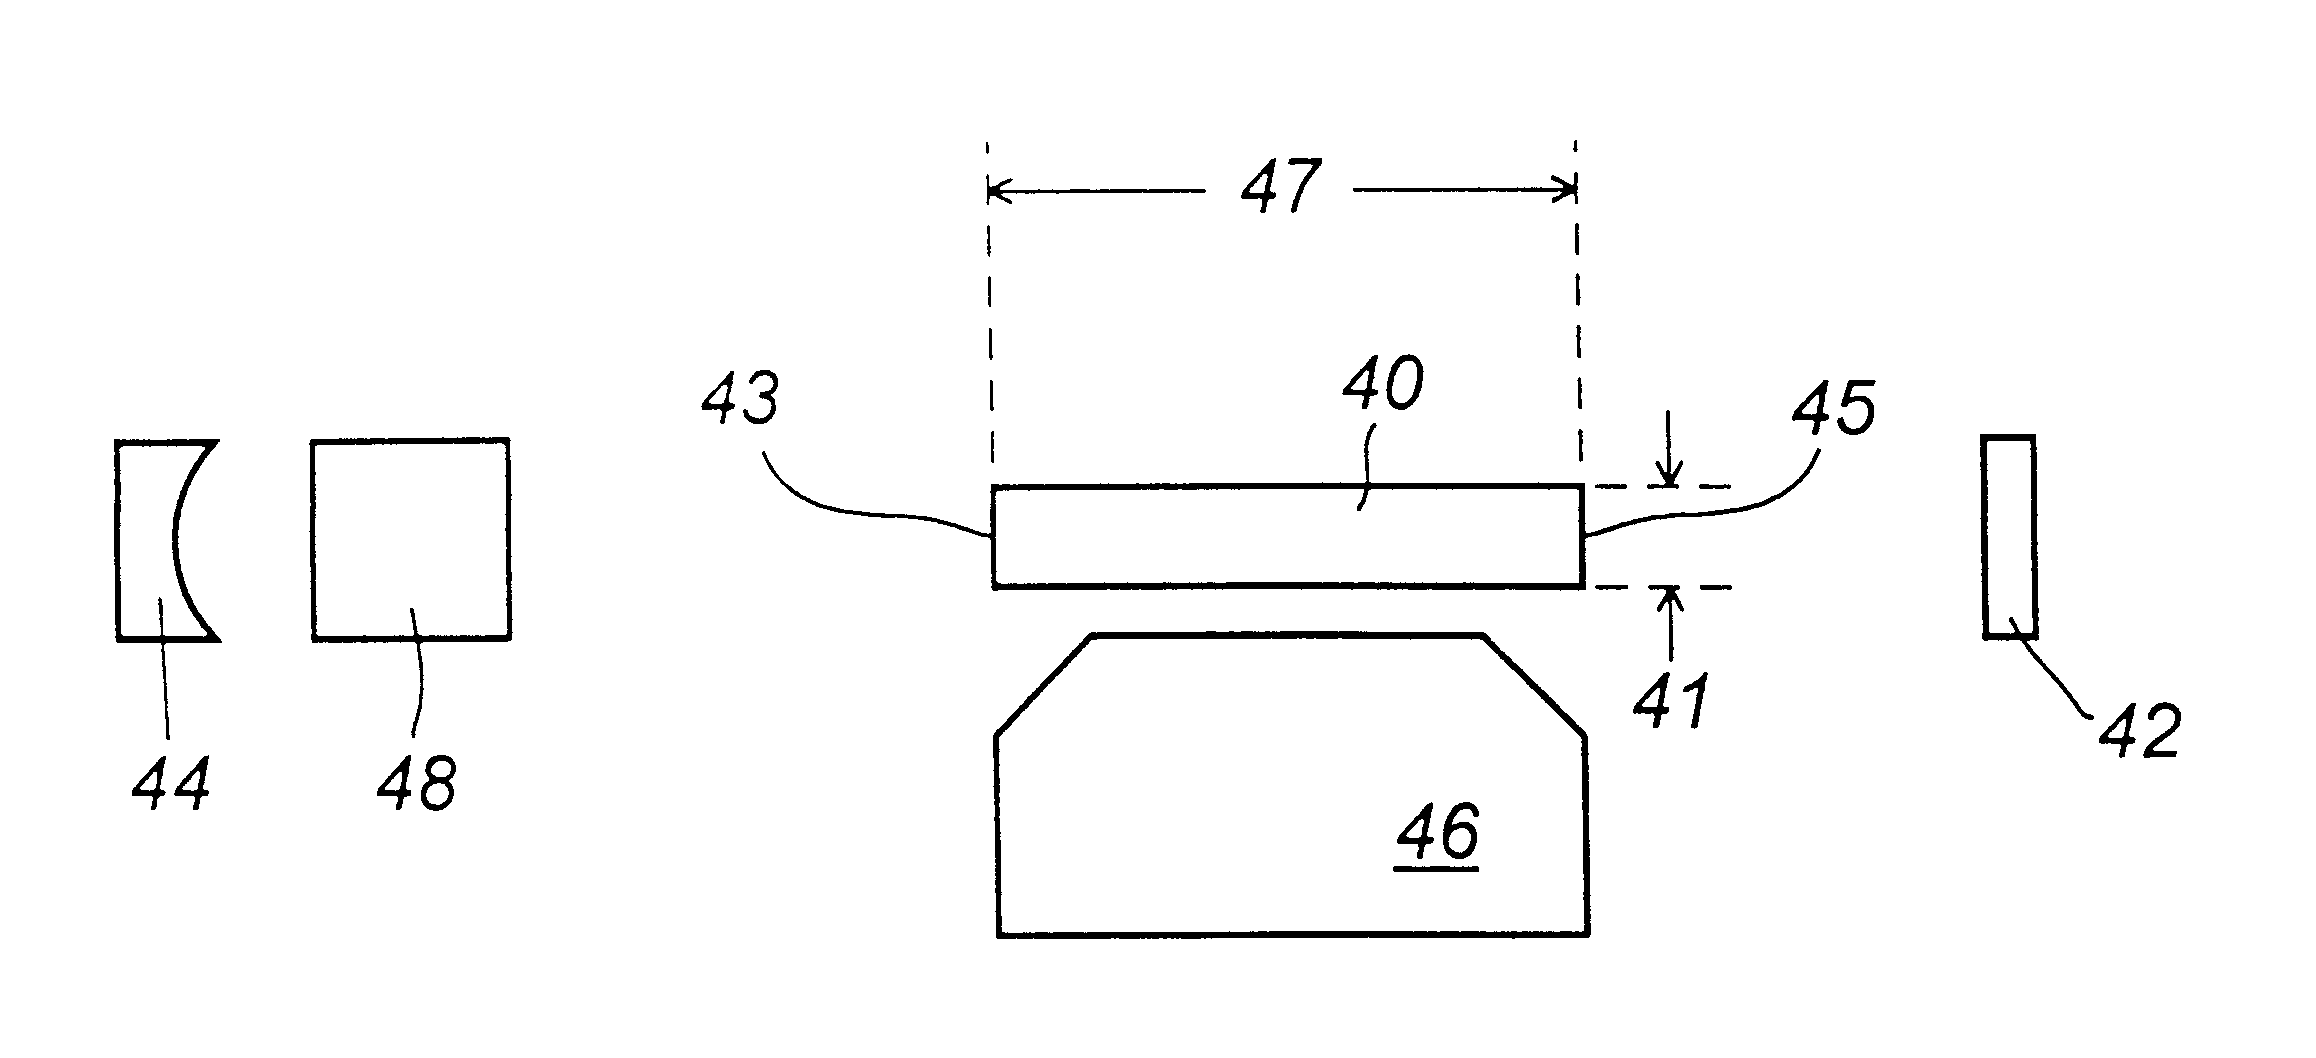 Laser with absorption optimized pumping of a gain medium